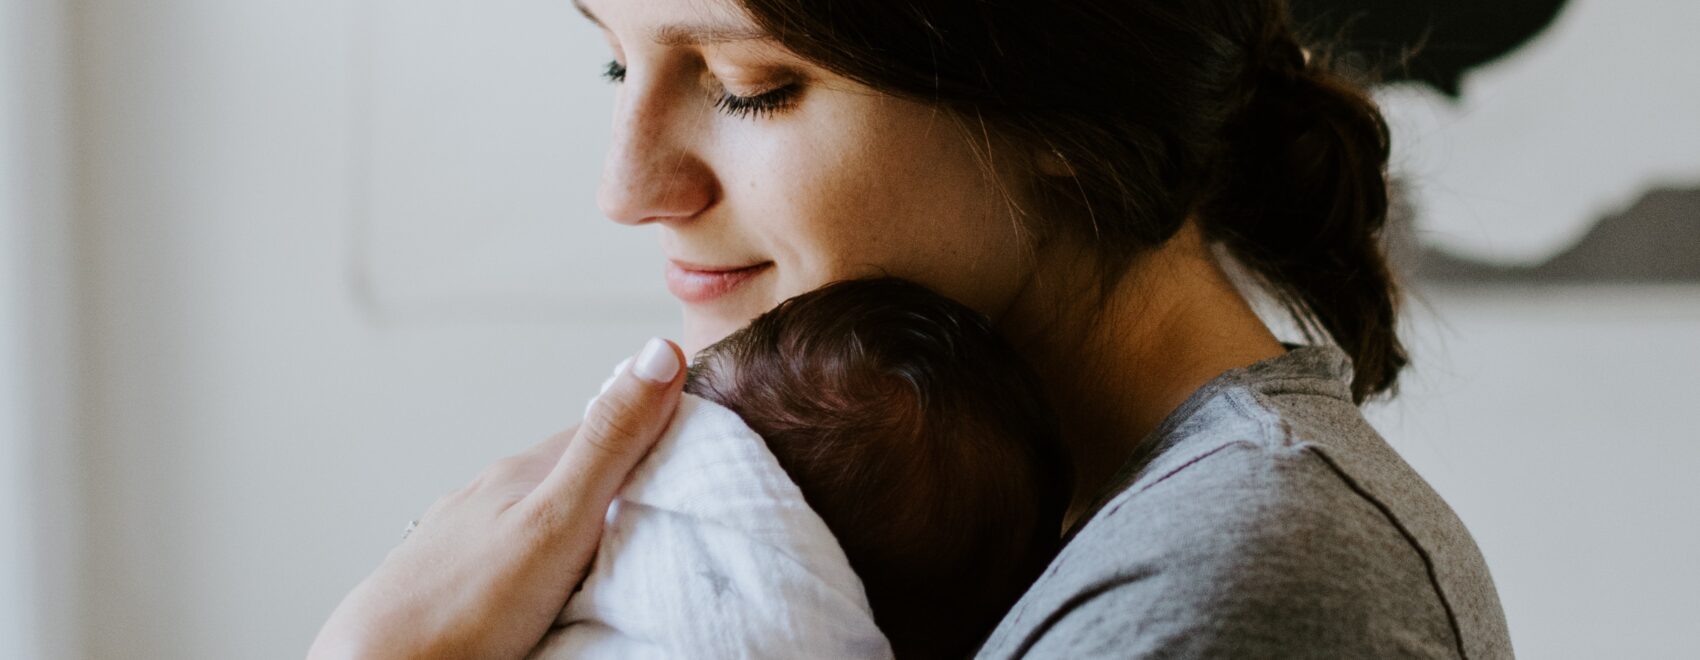 Image of a mom soon after birth holding her baby. Have you recently had a baby and looking for "massage therapy near me"? If so you could benefit from getting a post natal massage in Orland Park, IL 60423. Reach out and schedule your postpartum massage at our Orland Park, IL office. Call today!